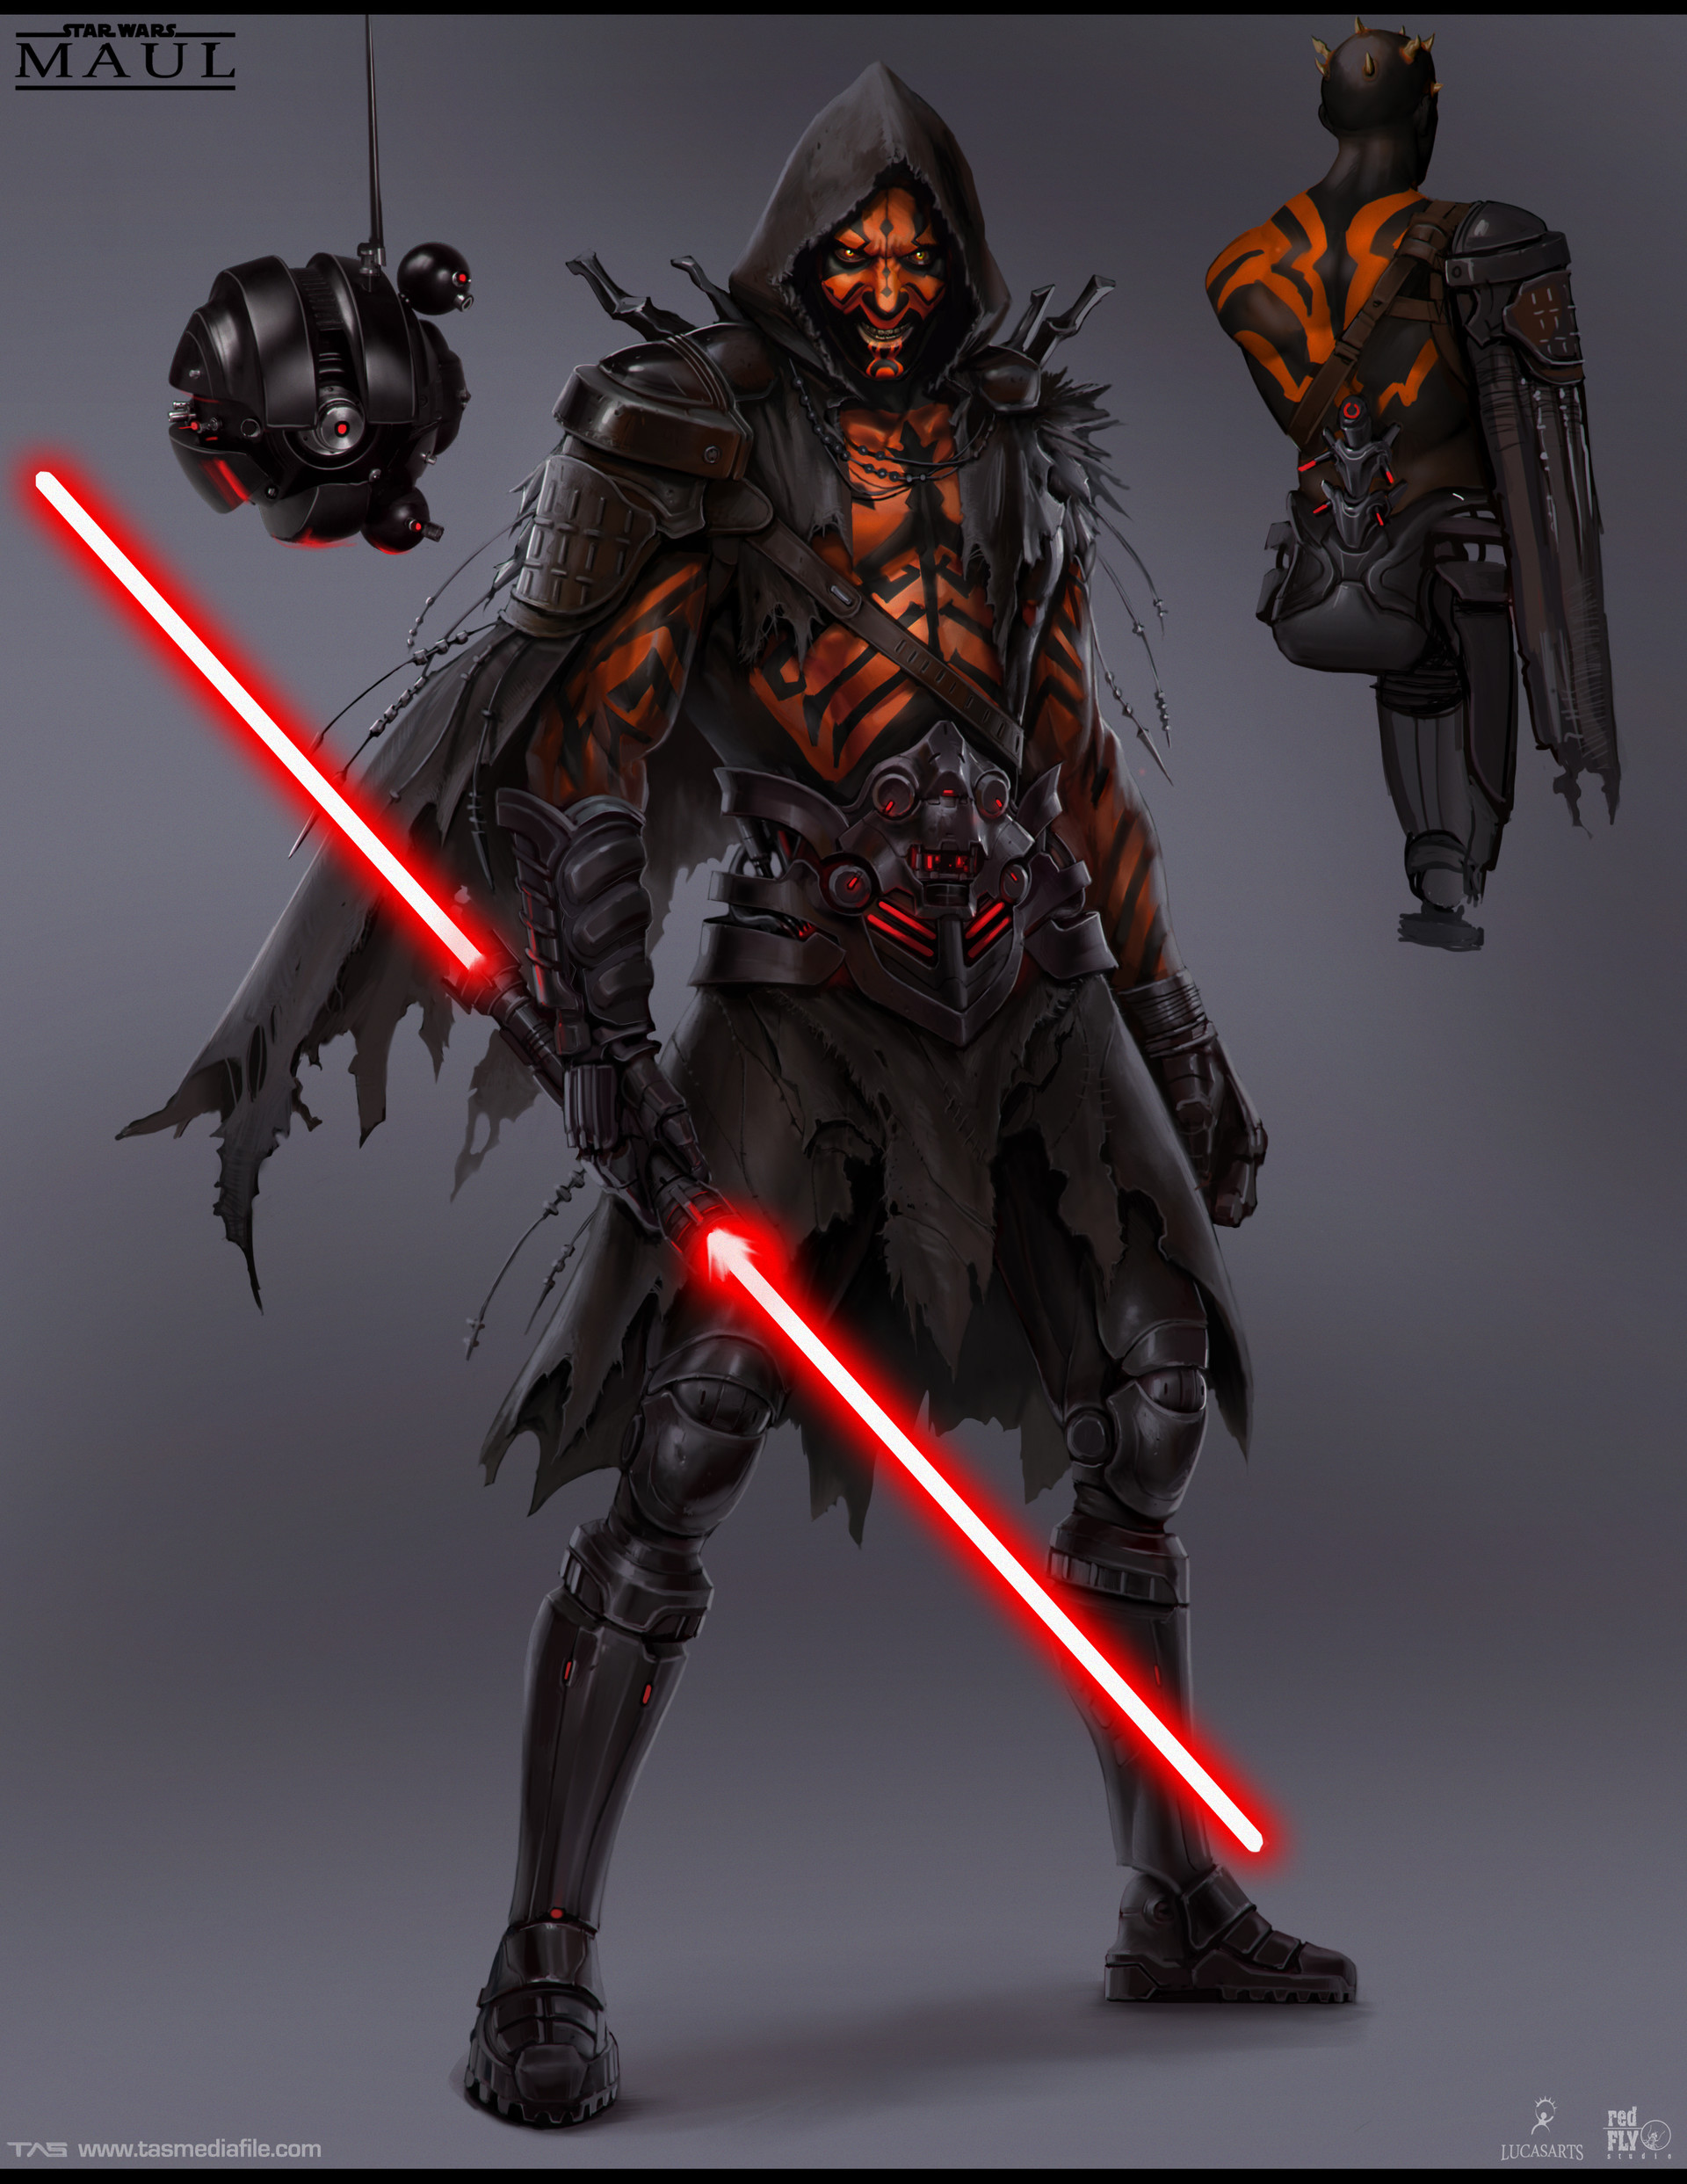 Fine Art: A Look At That Cancelled Darth Maul Game